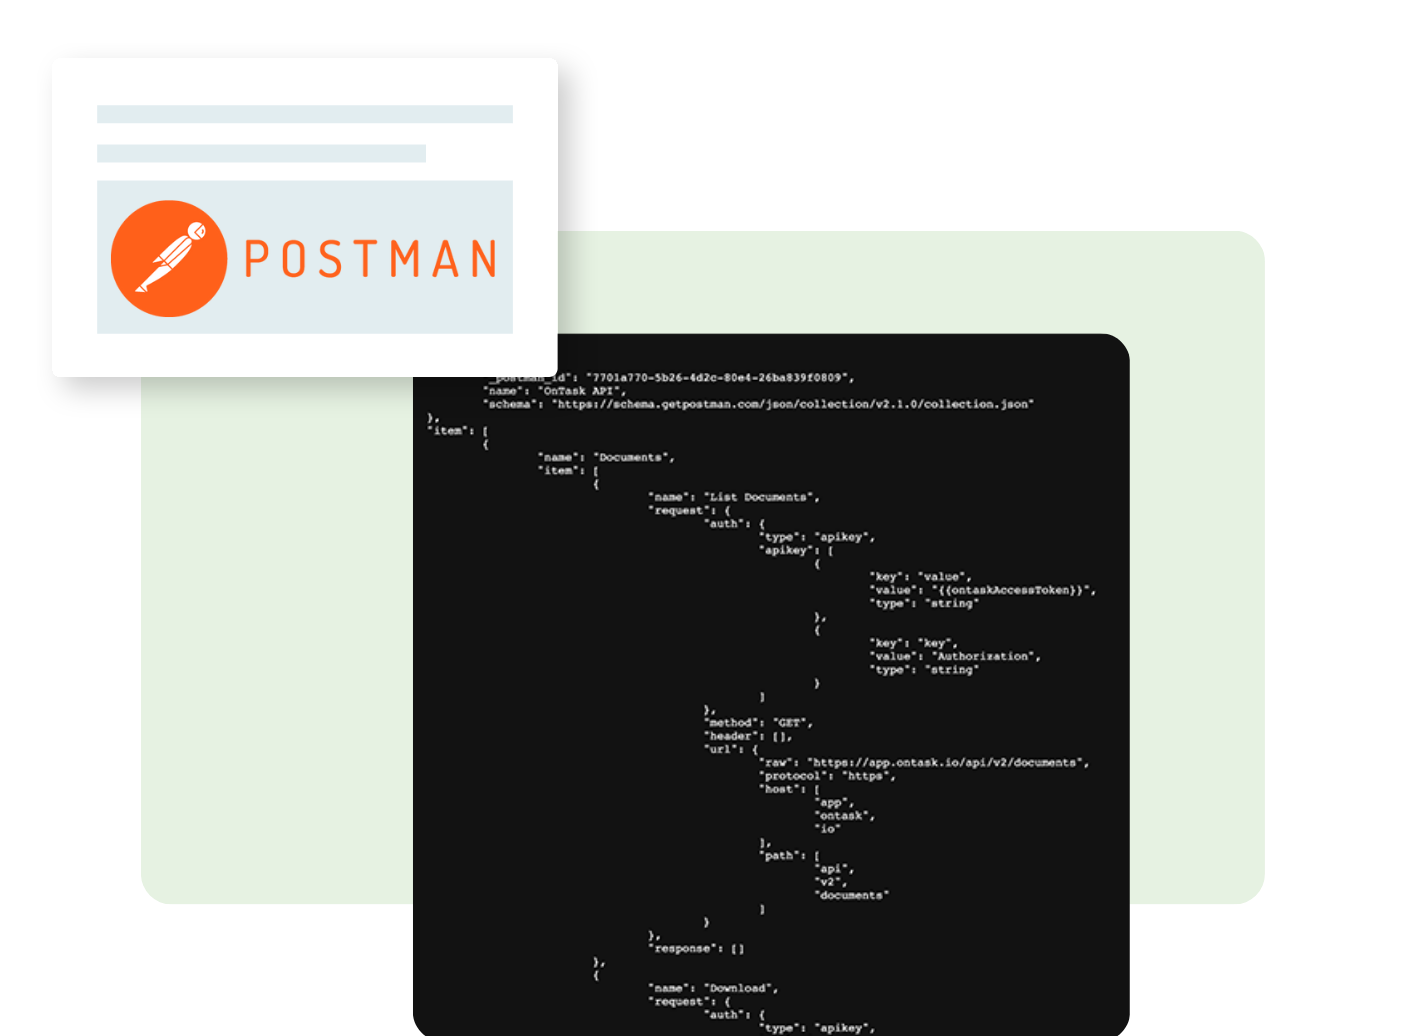 Postman Collection Postman allows you to explore and test the Docubee API using a collection of calls we’ve selected.